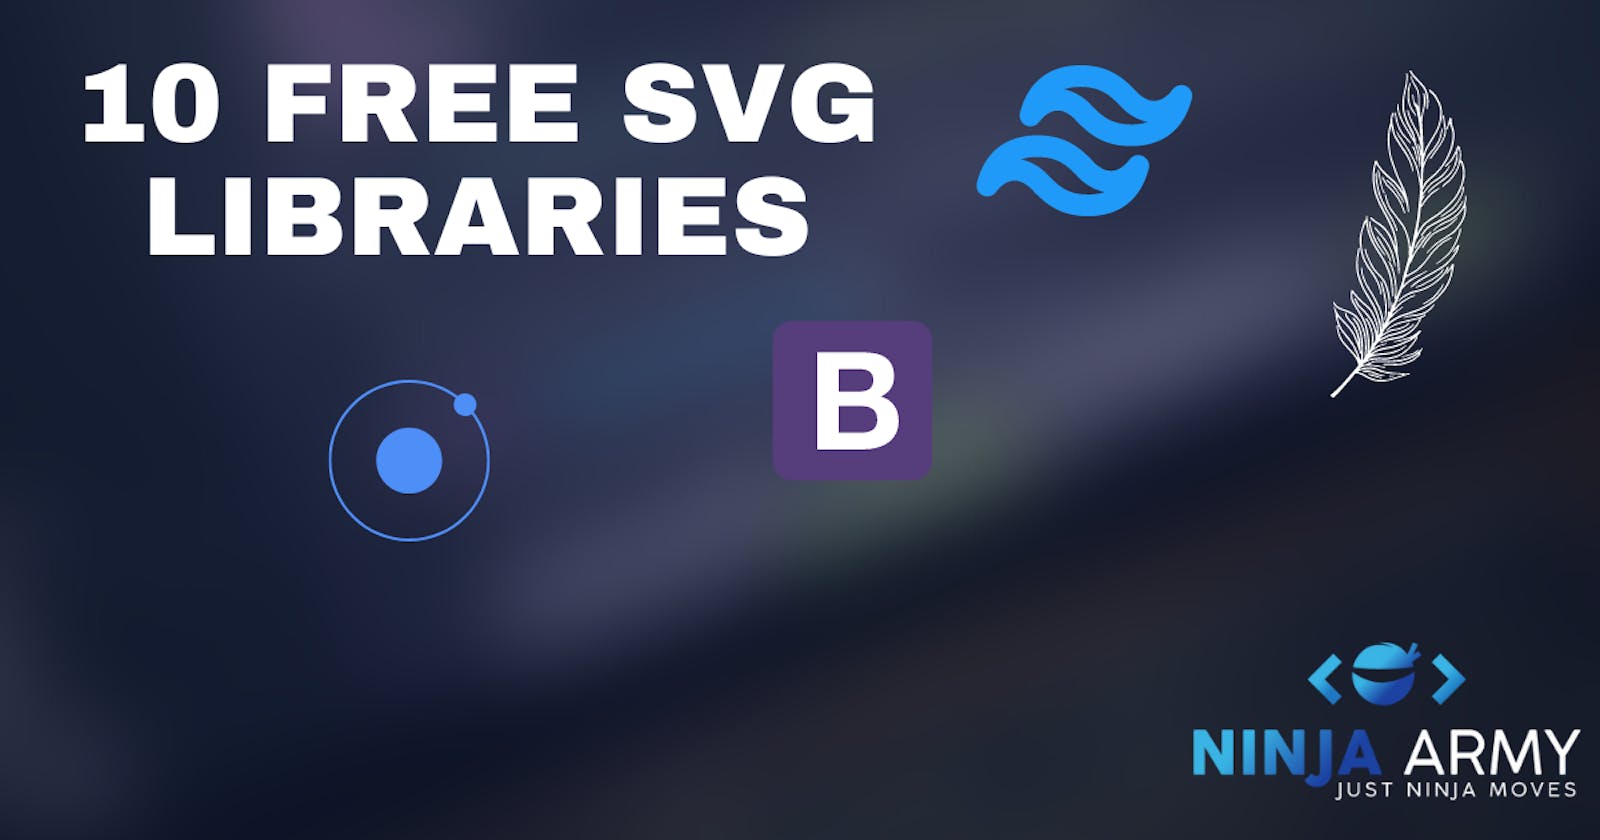 10 SVG Libraries - FREE (Open  Source)